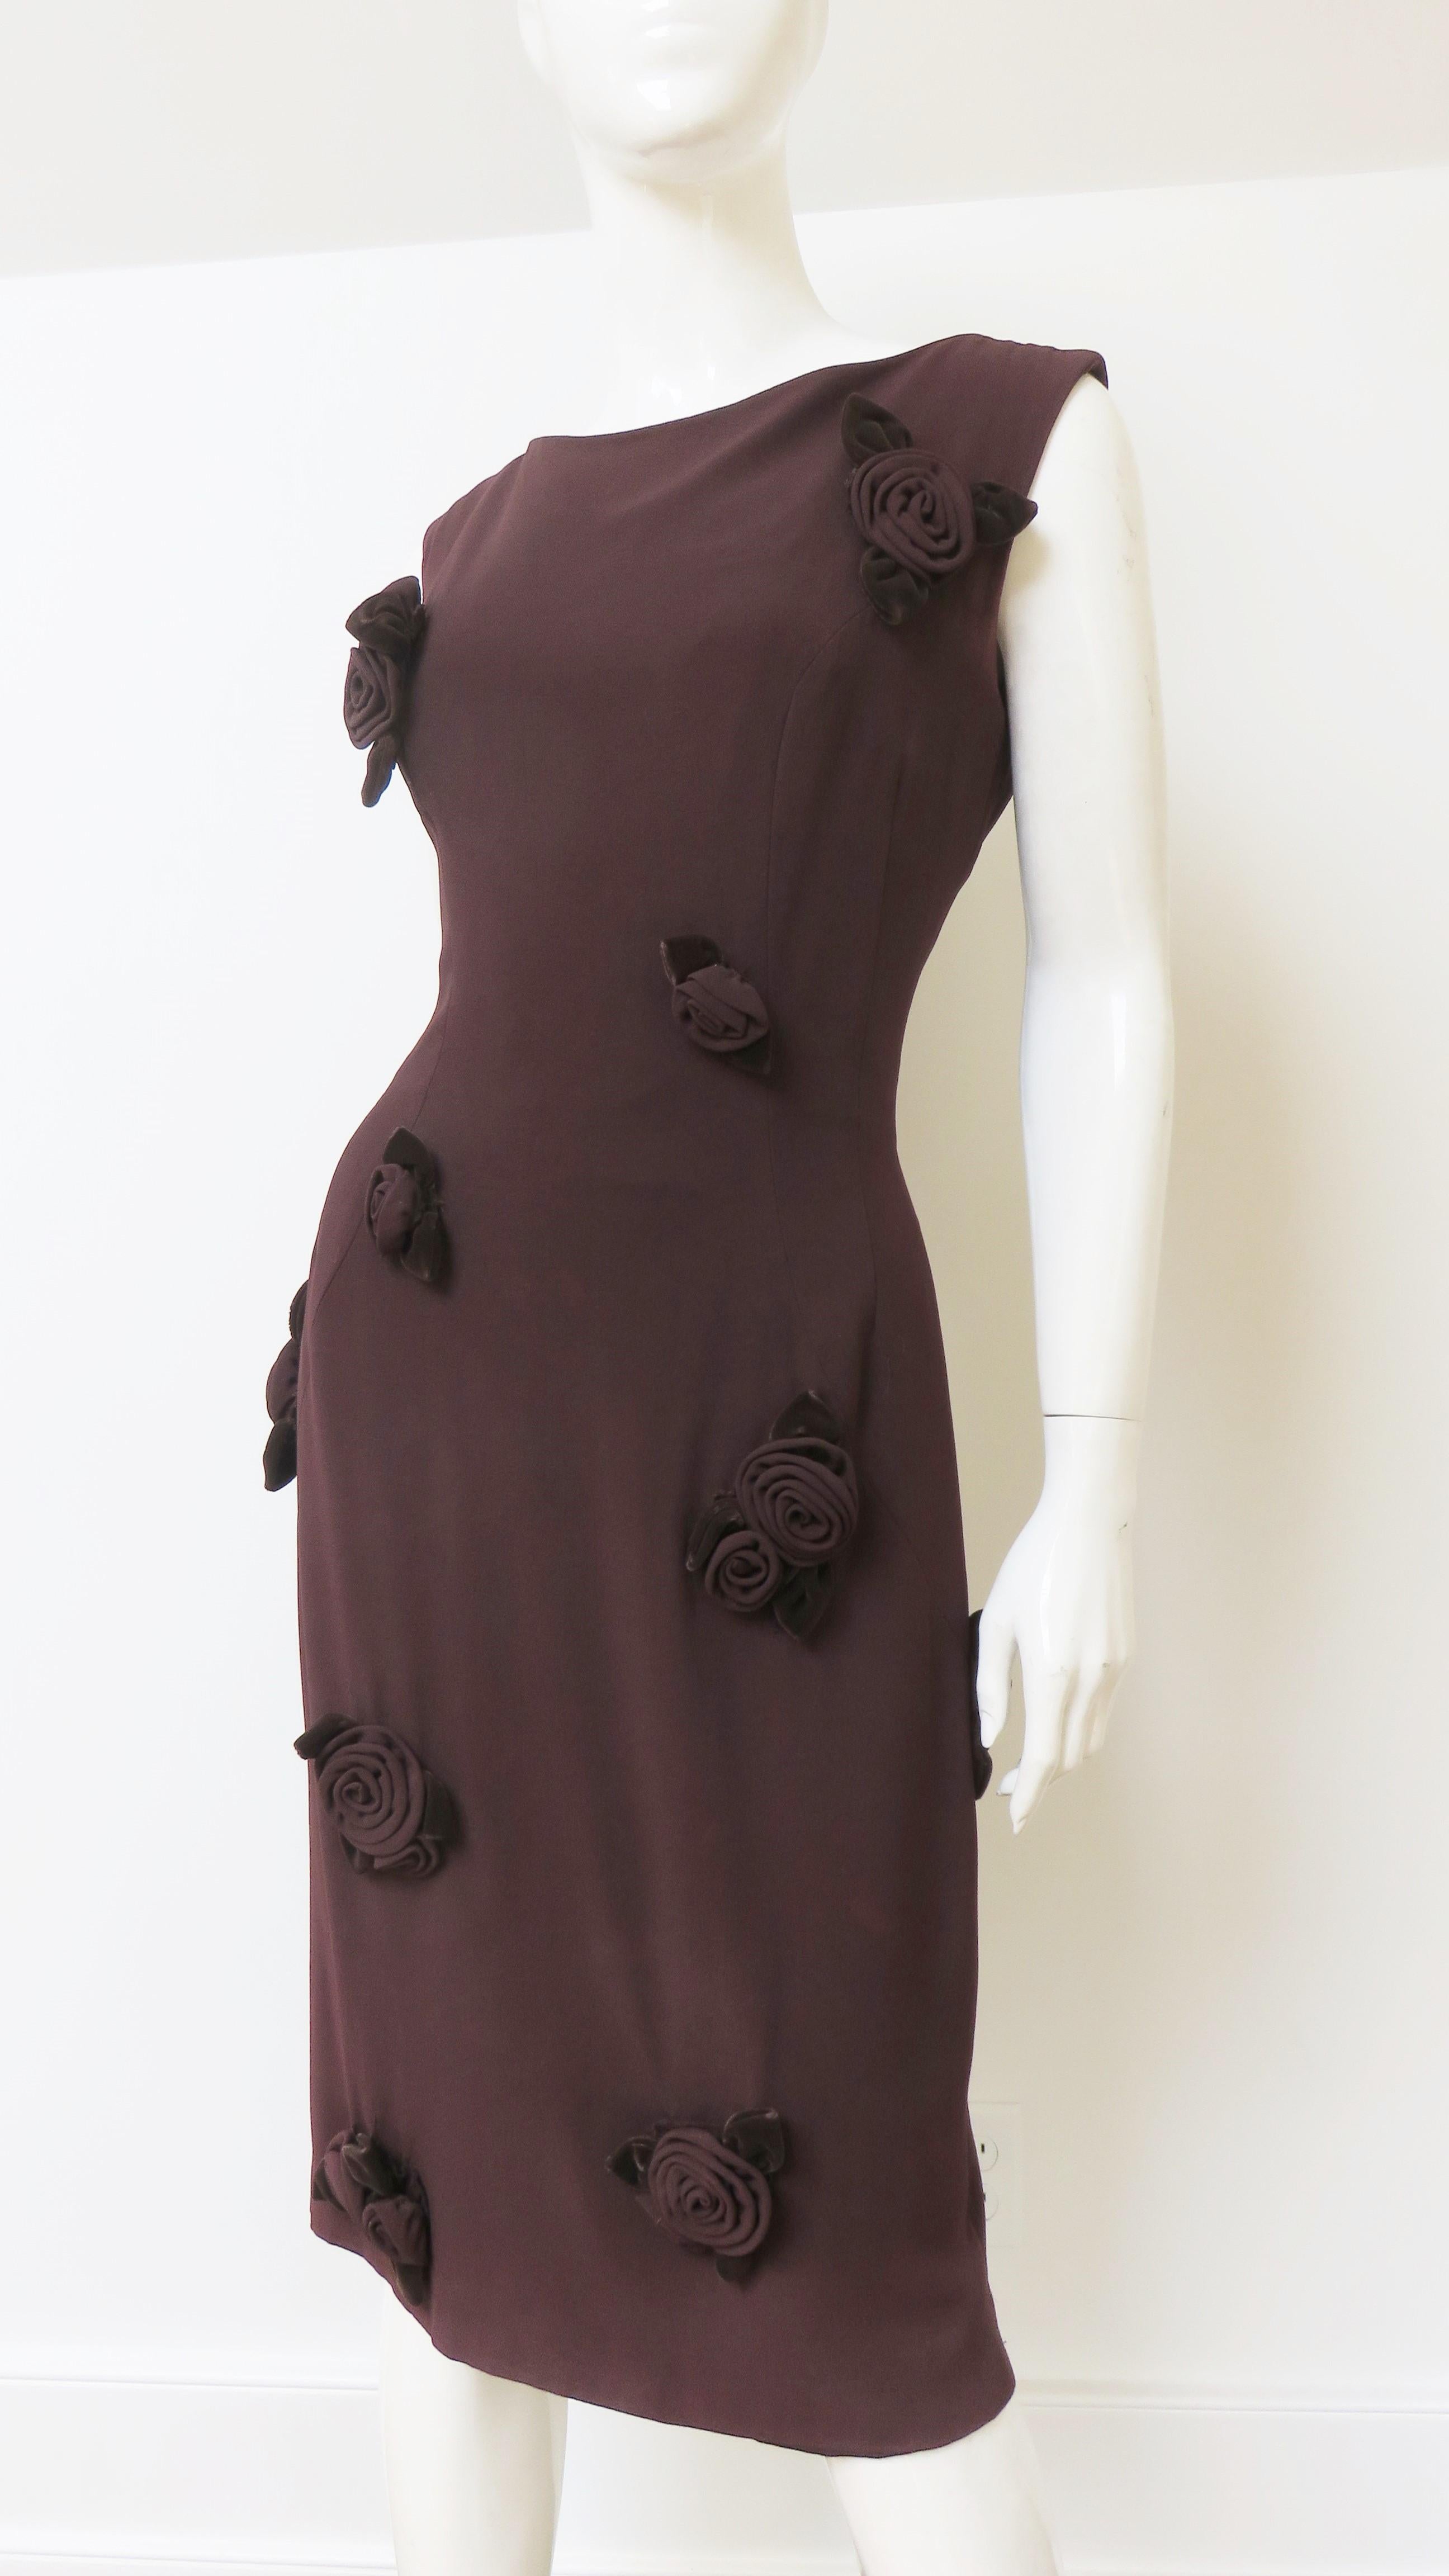 Estevez Brown Flower Applique Dress 1960s In Good Condition For Sale In Water Mill, NY